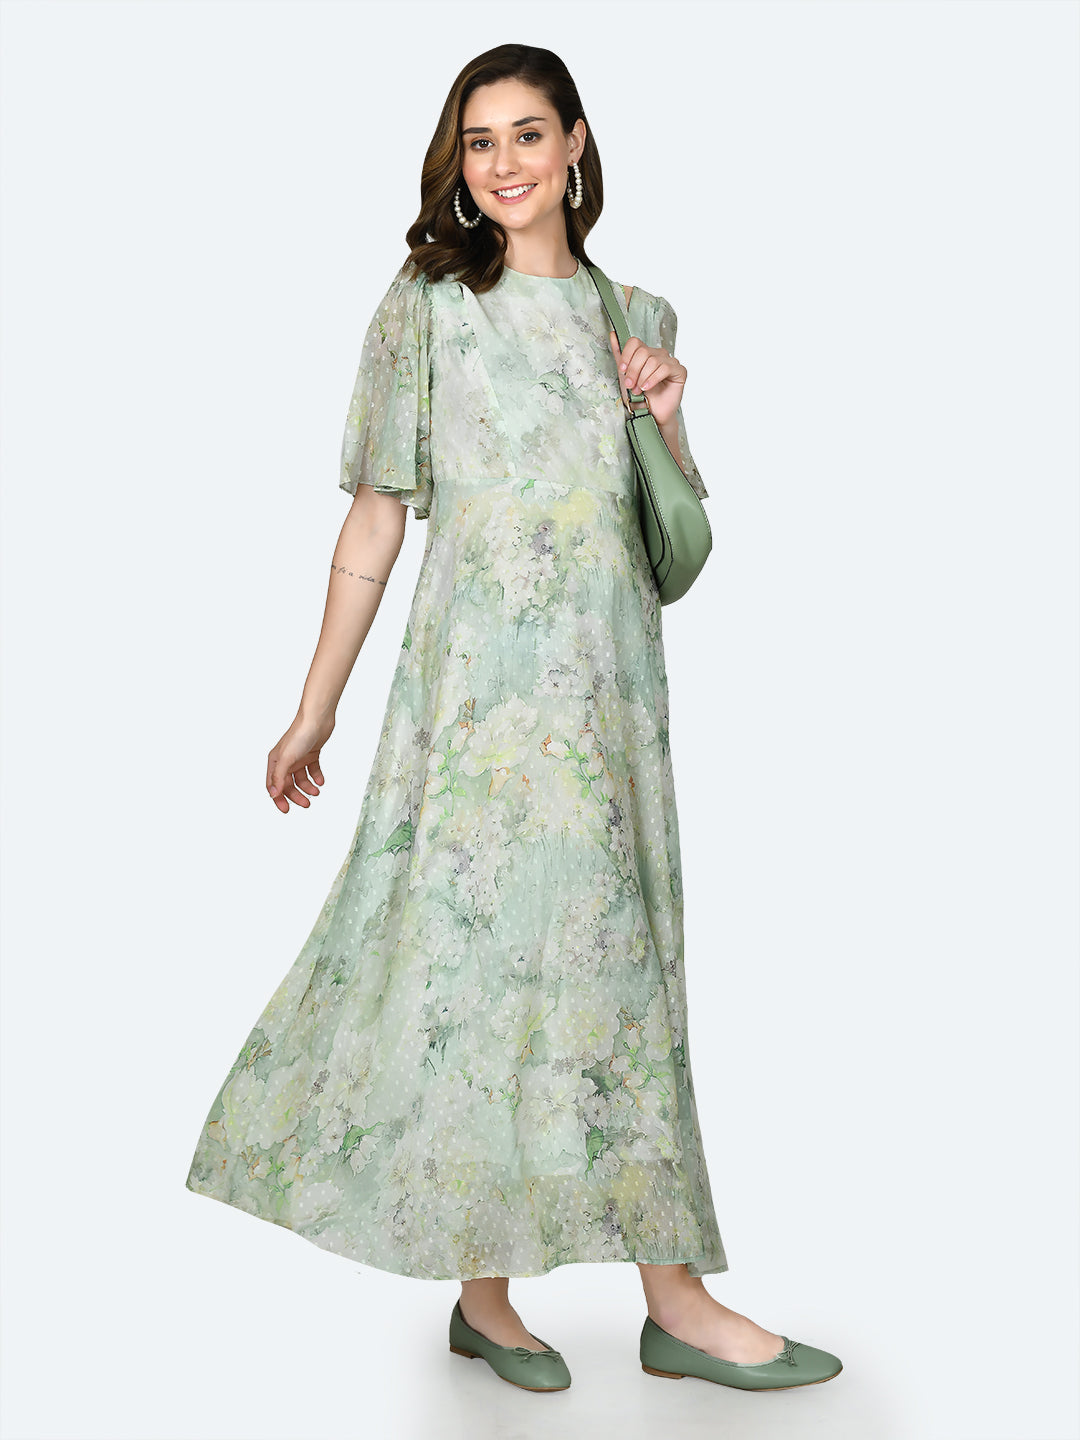 Green Printed Cut Out Maxi Dress For Women